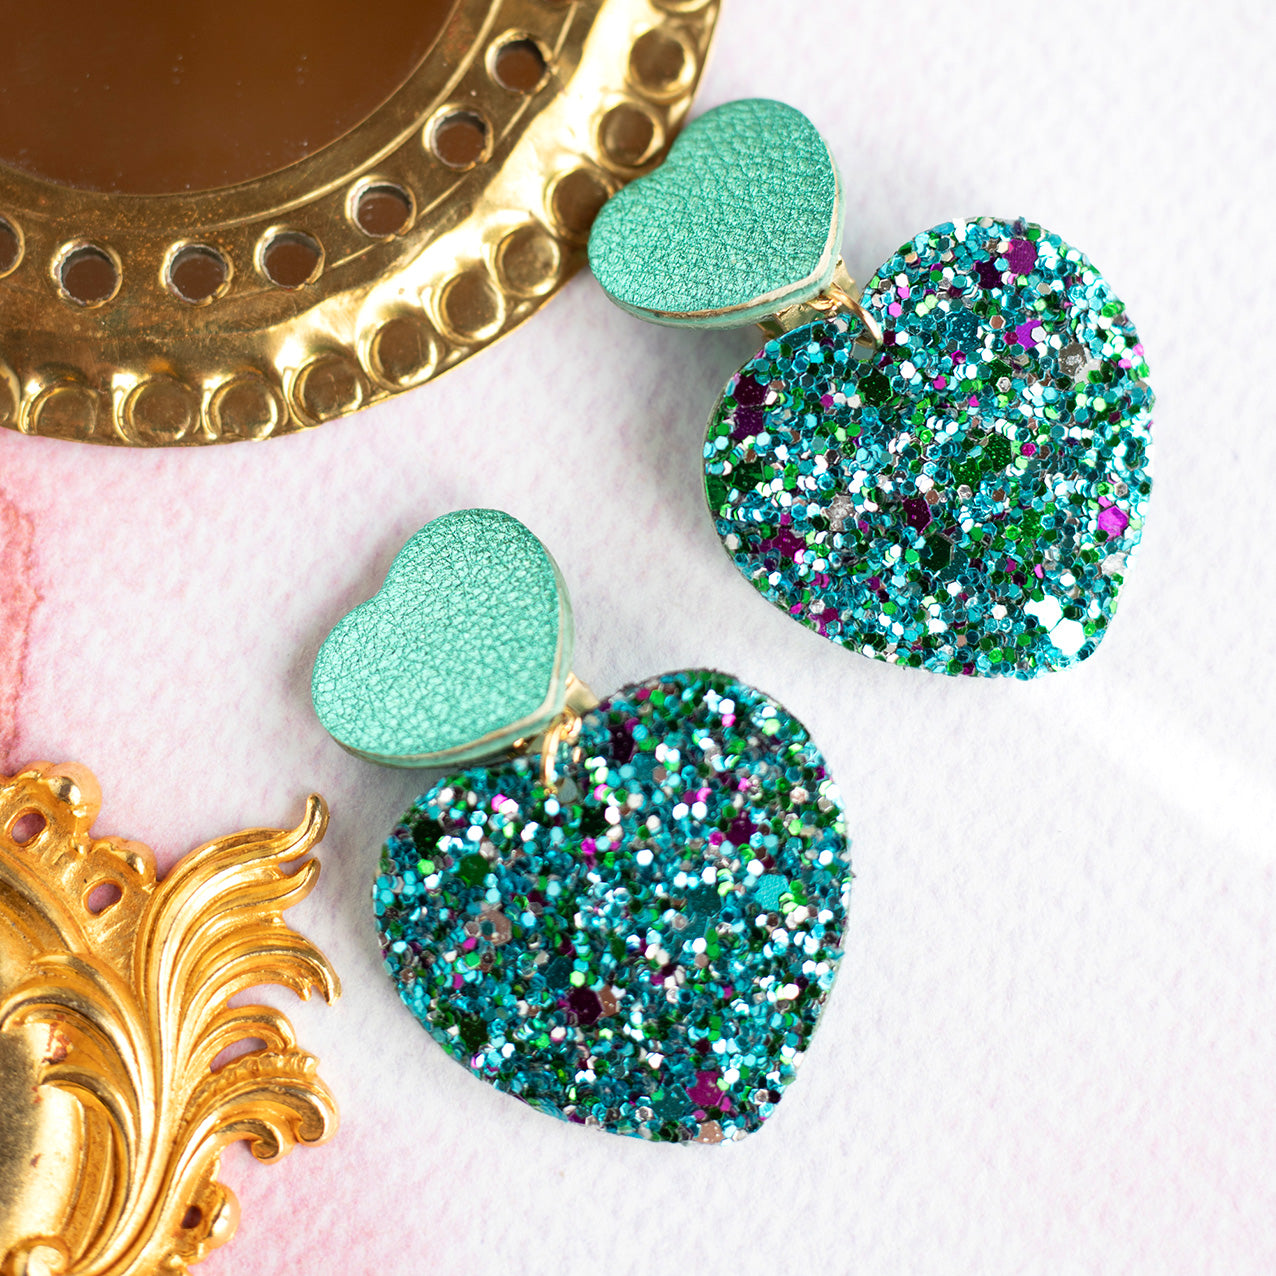 Copy of Double Hearts clip-on earrings - metallic turquoise leather and glitter